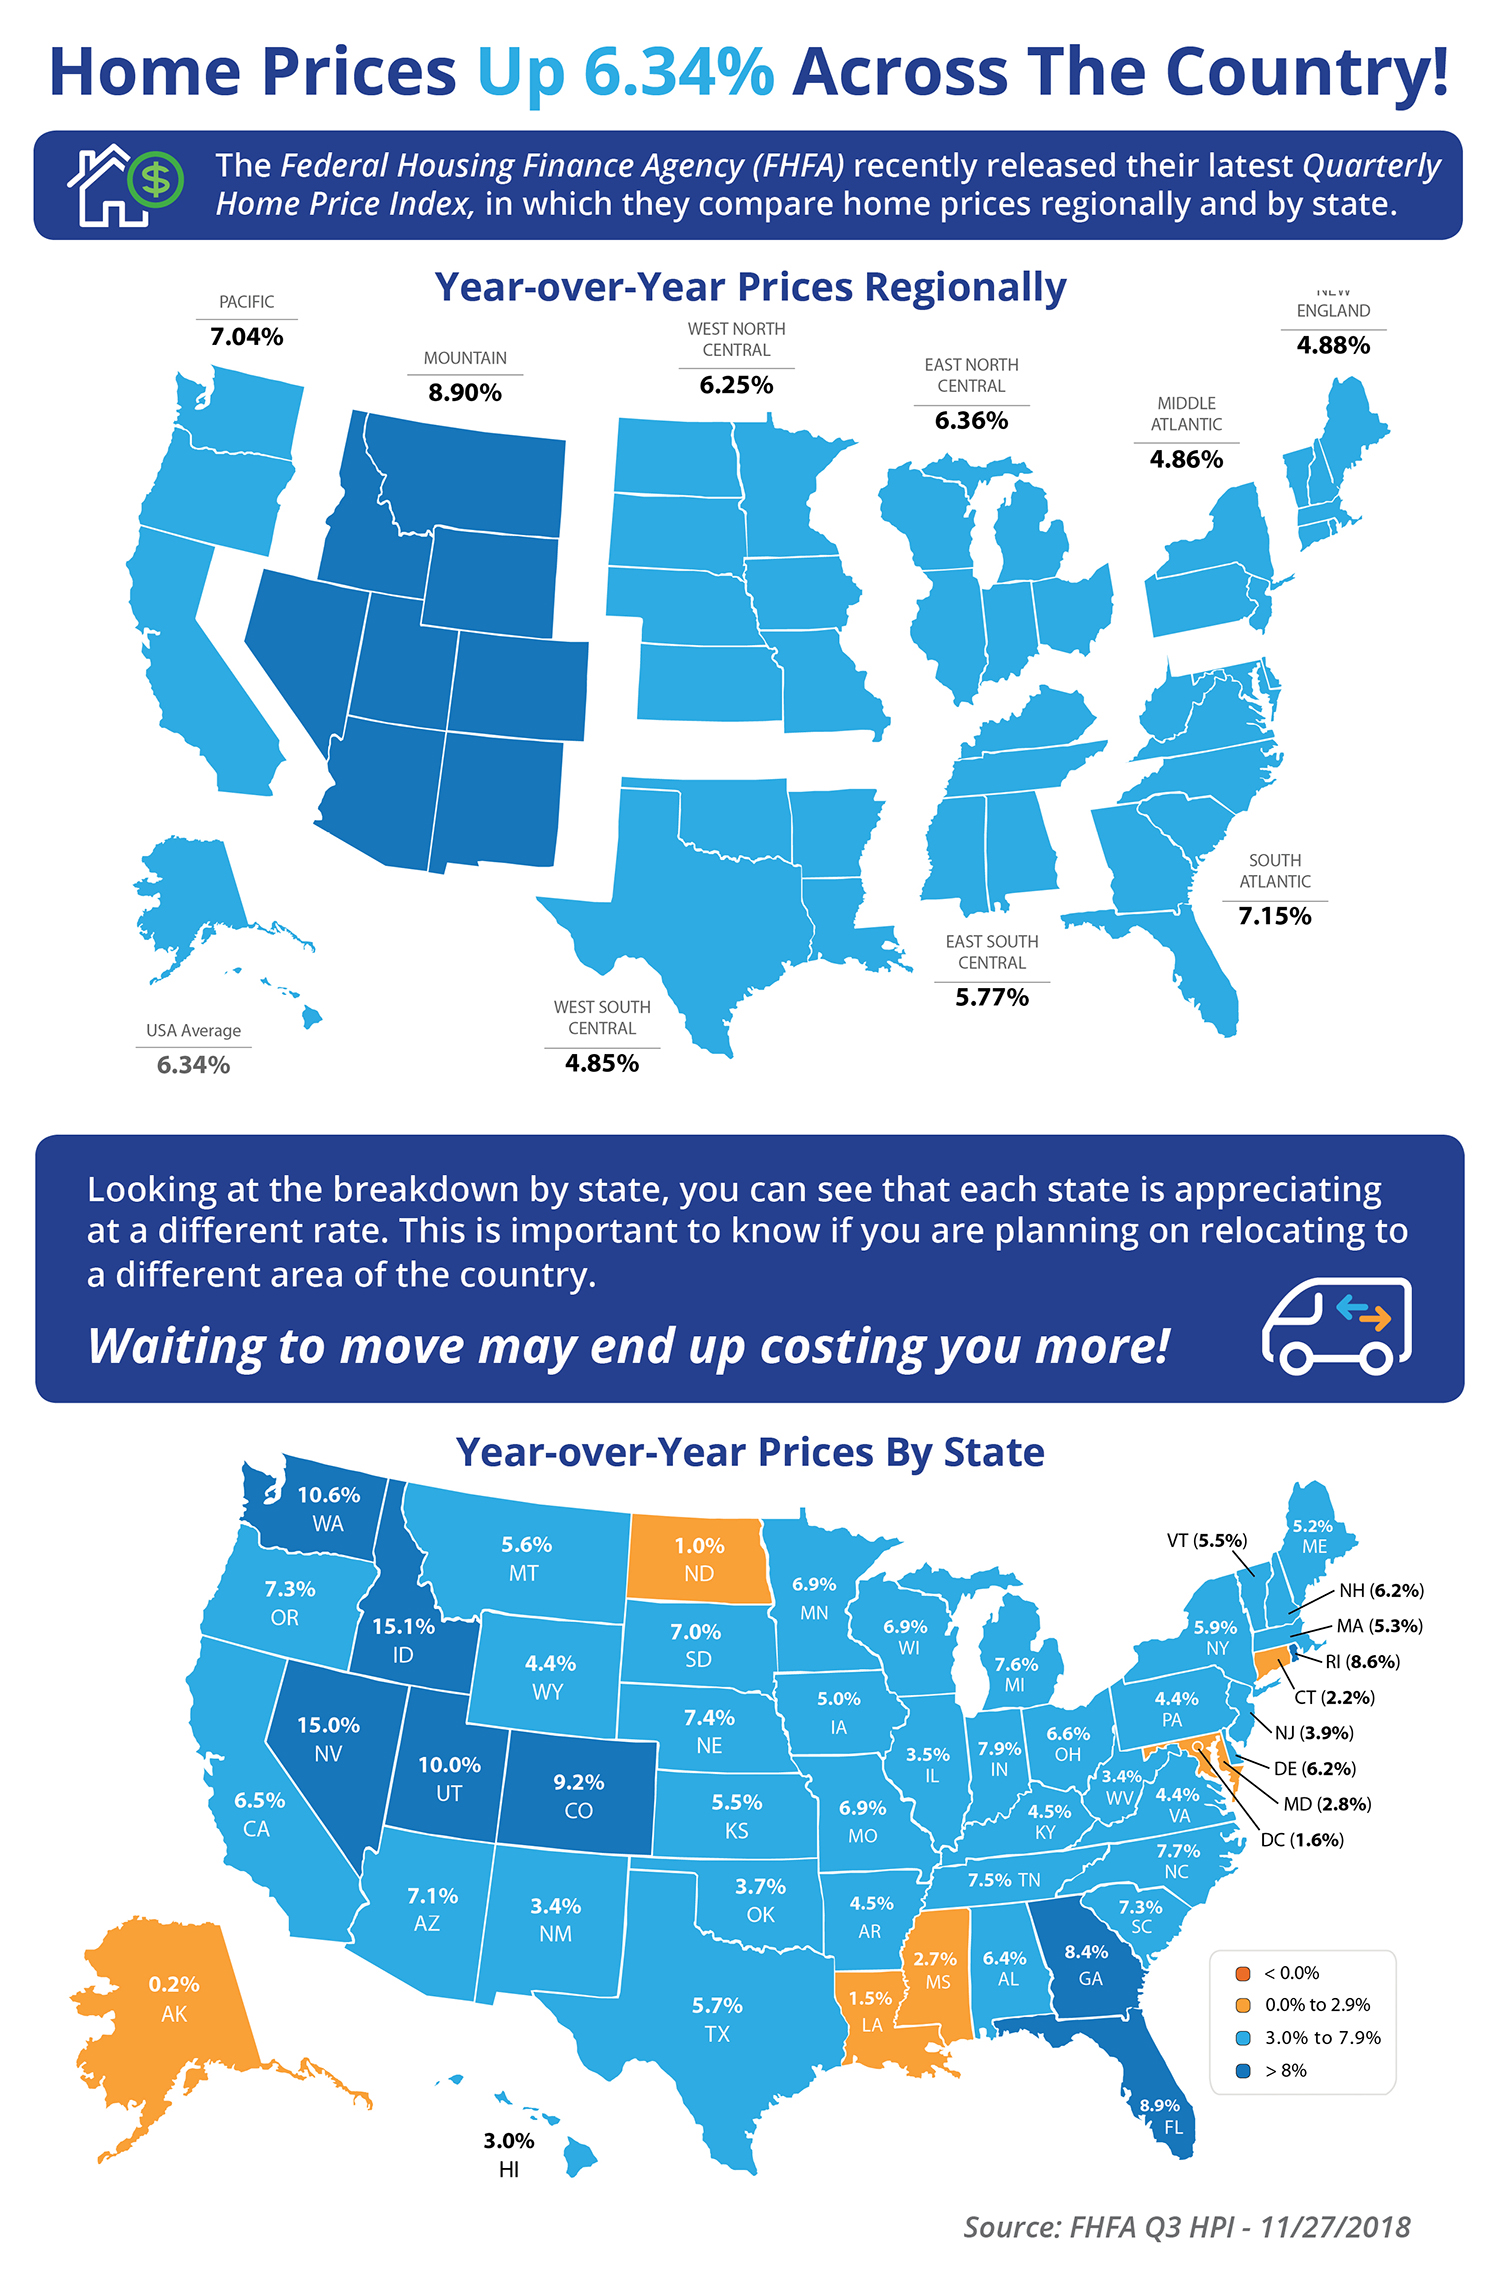 Home Prices Up 6.34% Across the Country! [INFOGRAPHIC] | Simplifying The Market